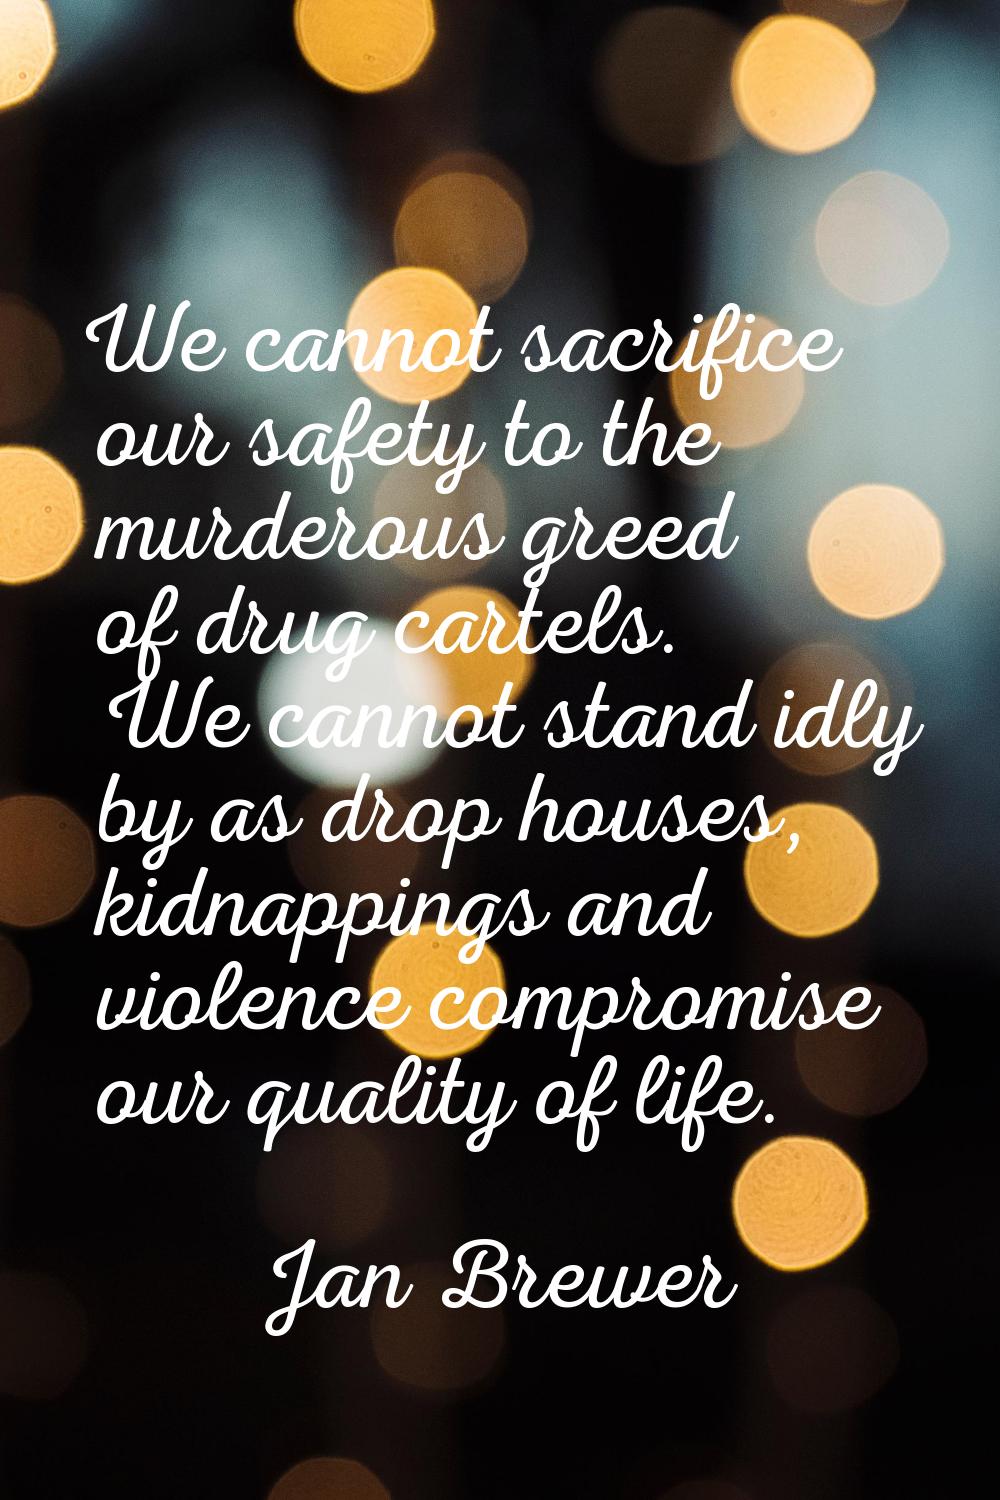 We cannot sacrifice our safety to the murderous greed of drug cartels. We cannot stand idly by as d